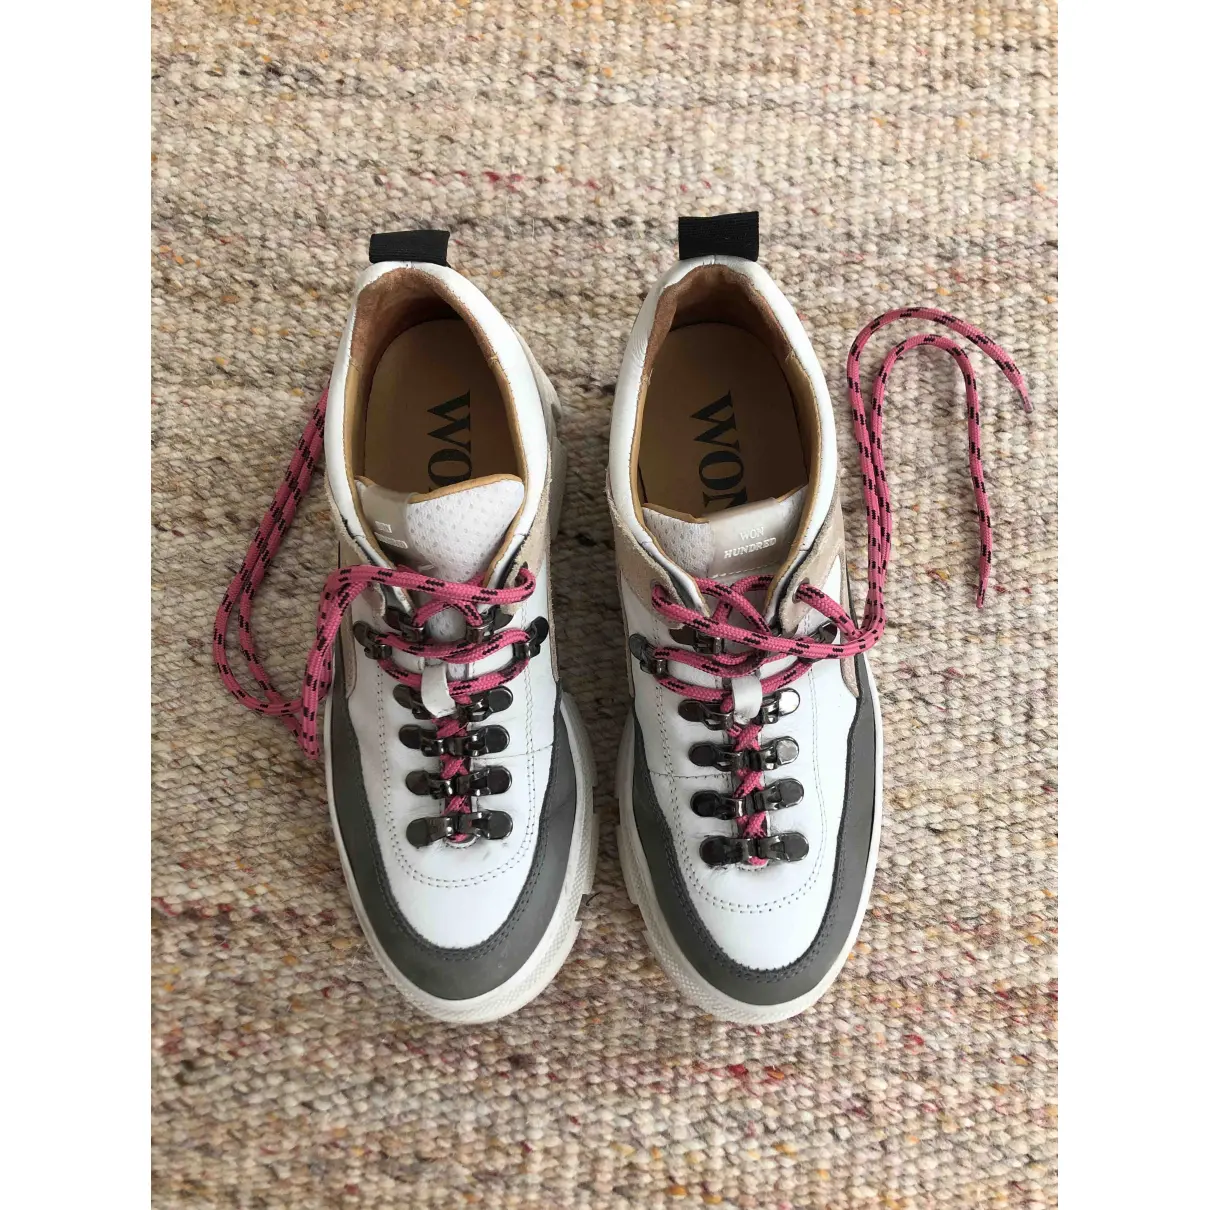 Buy Won Hundred Leather trainers online